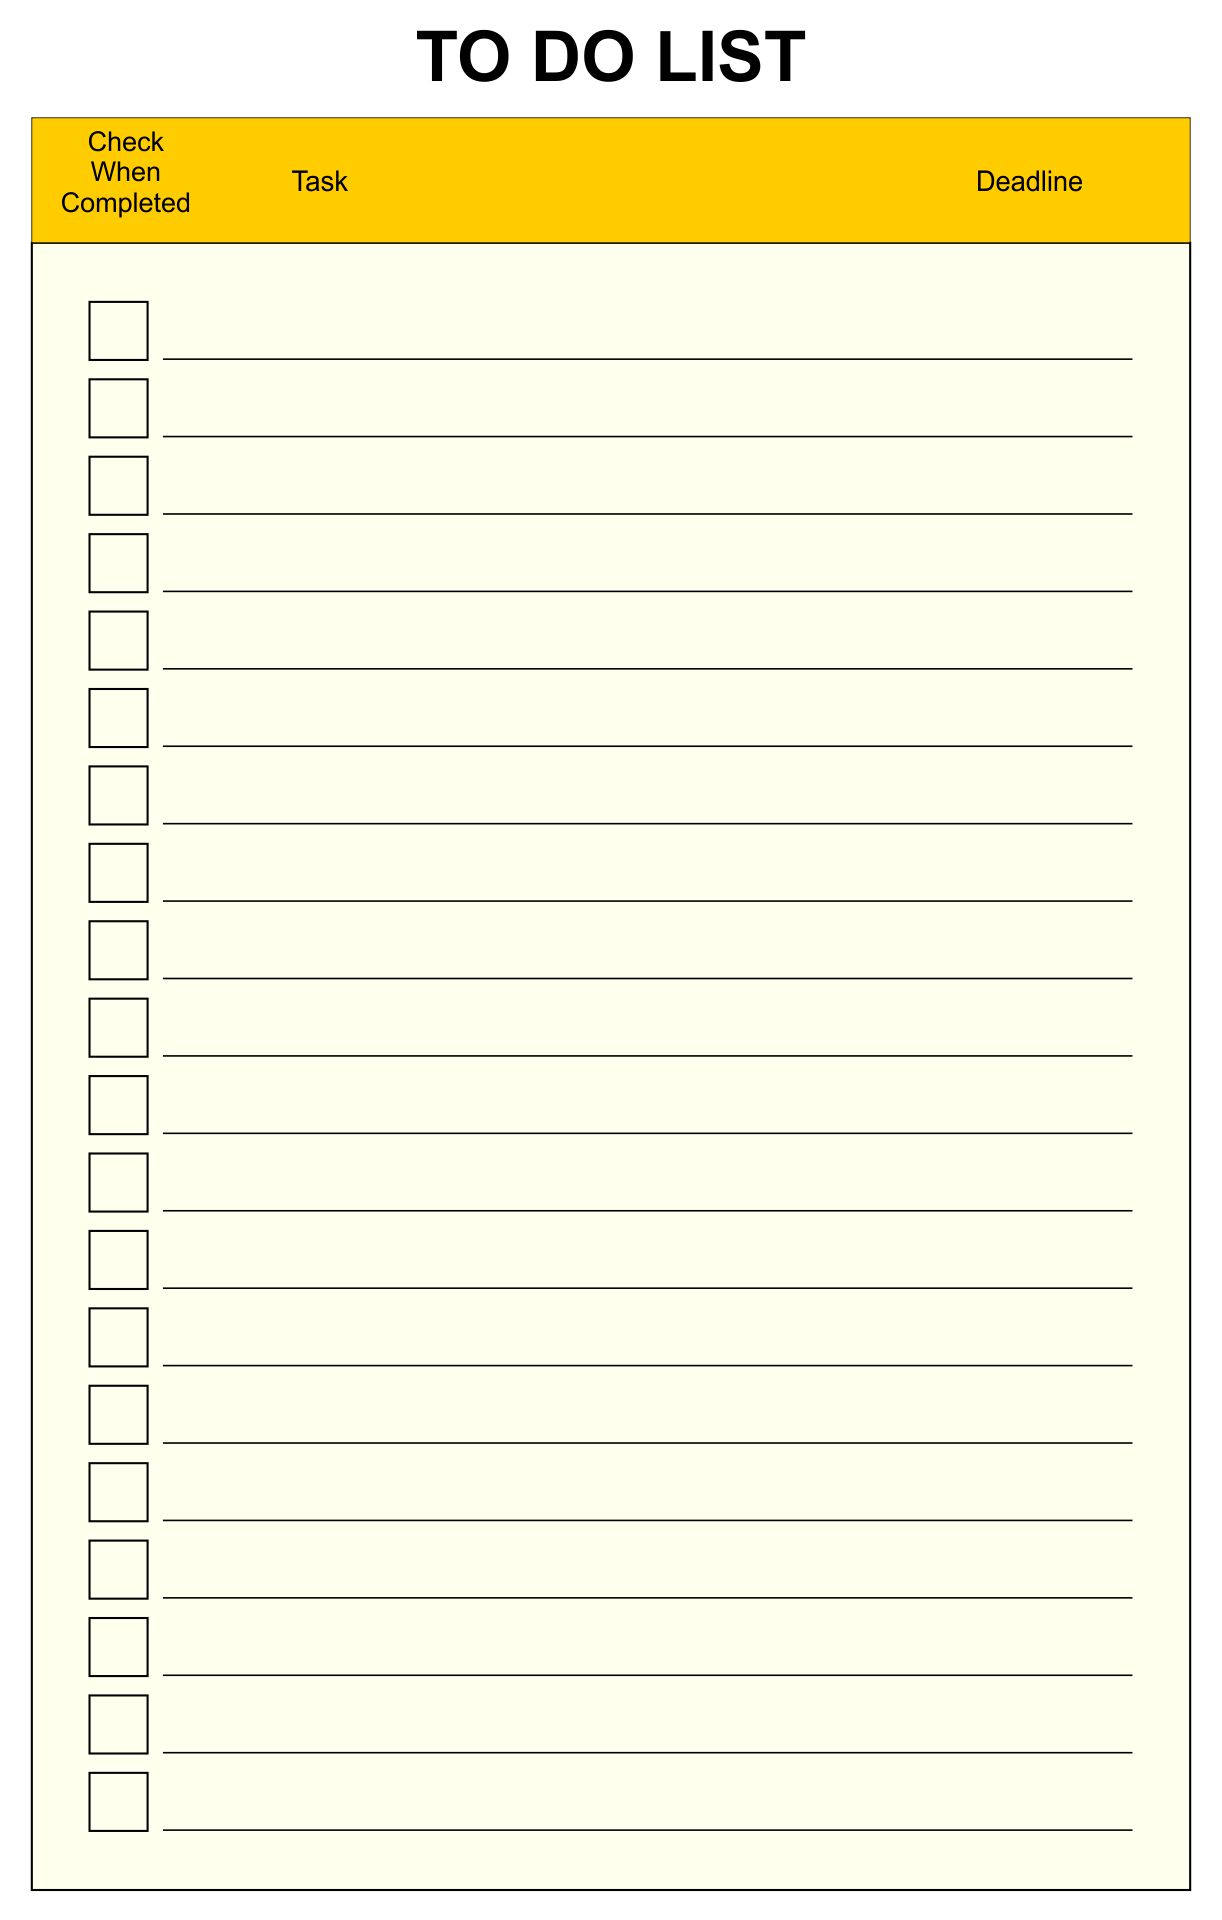 blank-to-do-list-template